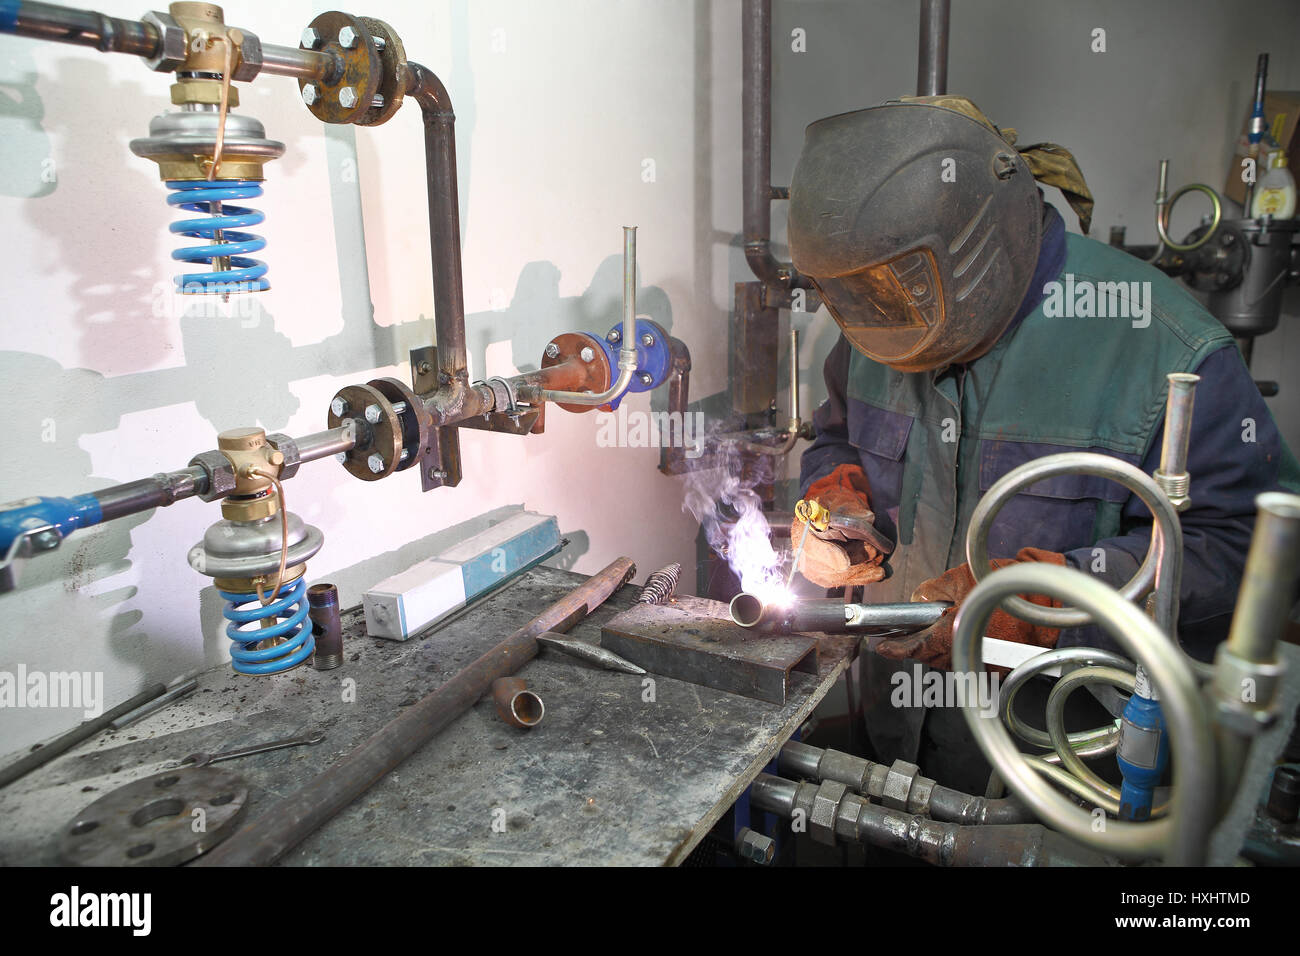 Electric Arc Welding Inside boiler room, Industrial Welder wearing protective gear, Face Shield and Gloves. Stock Photo